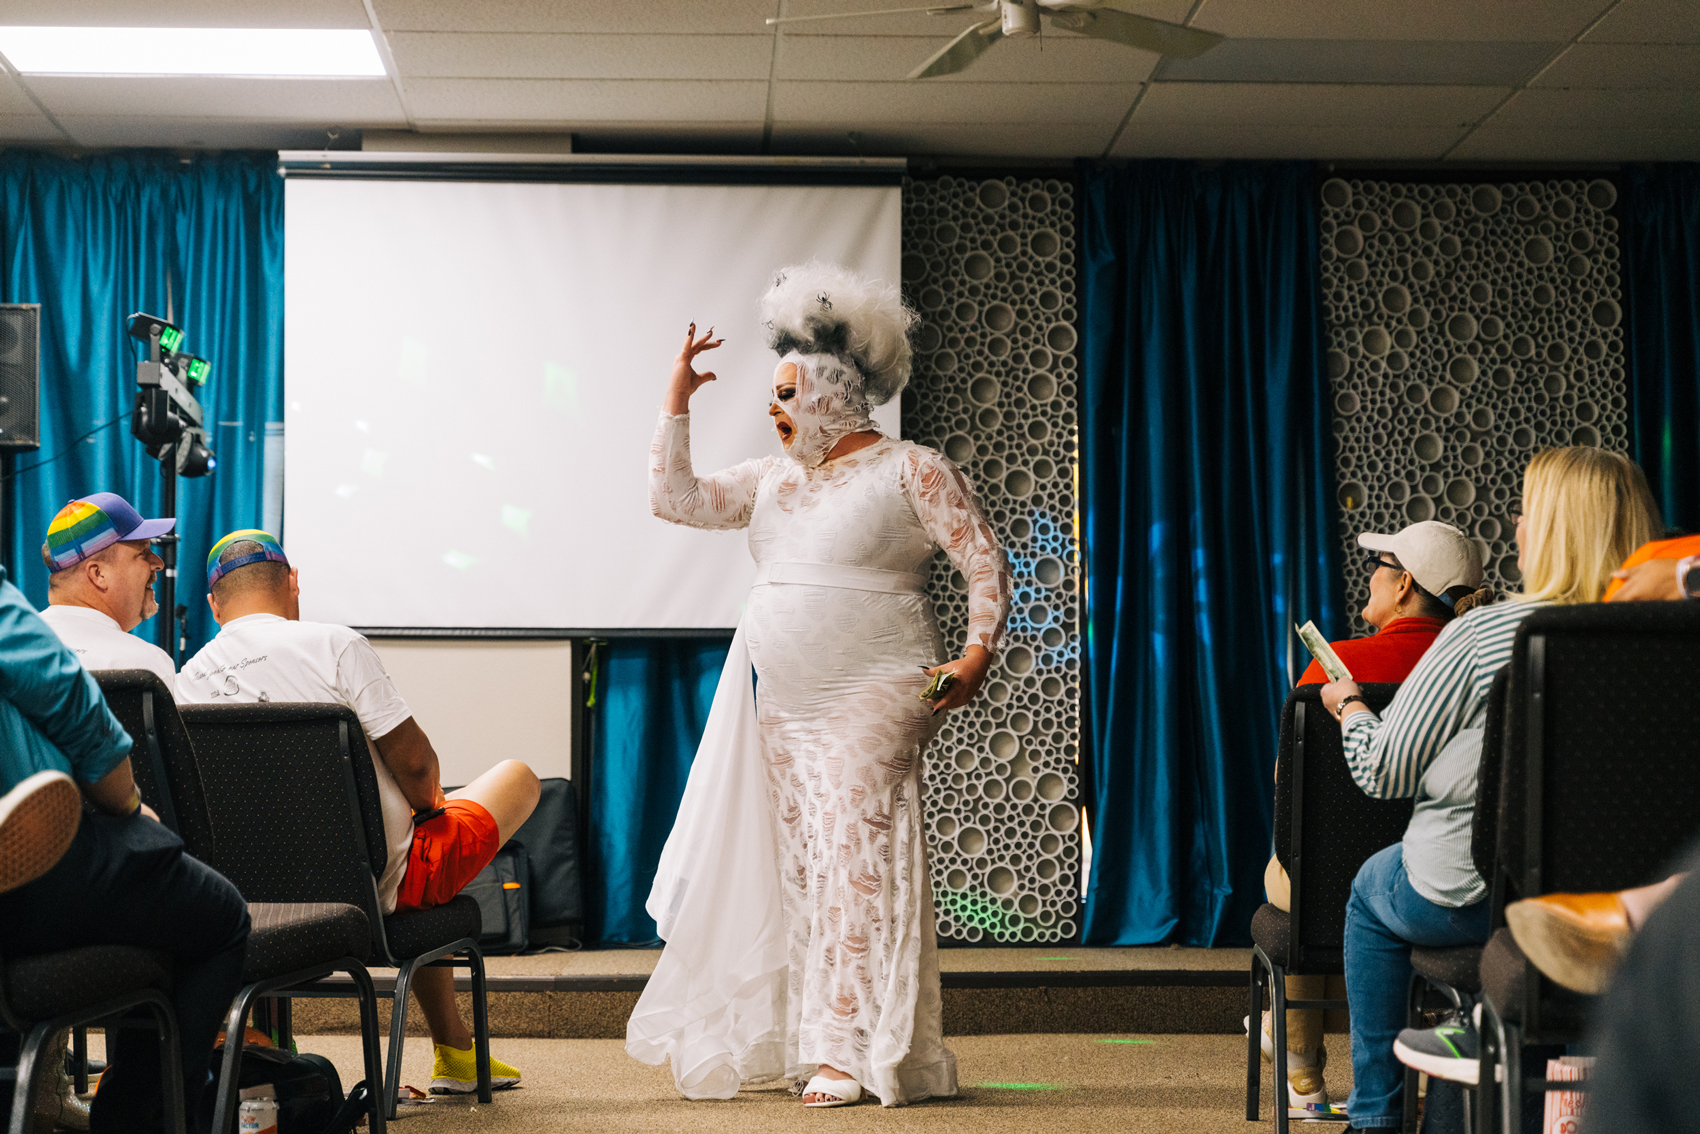 Drag queen Vegas Van Cartier performs at the after party, “Wicked with the Queens,” at First Christian Church